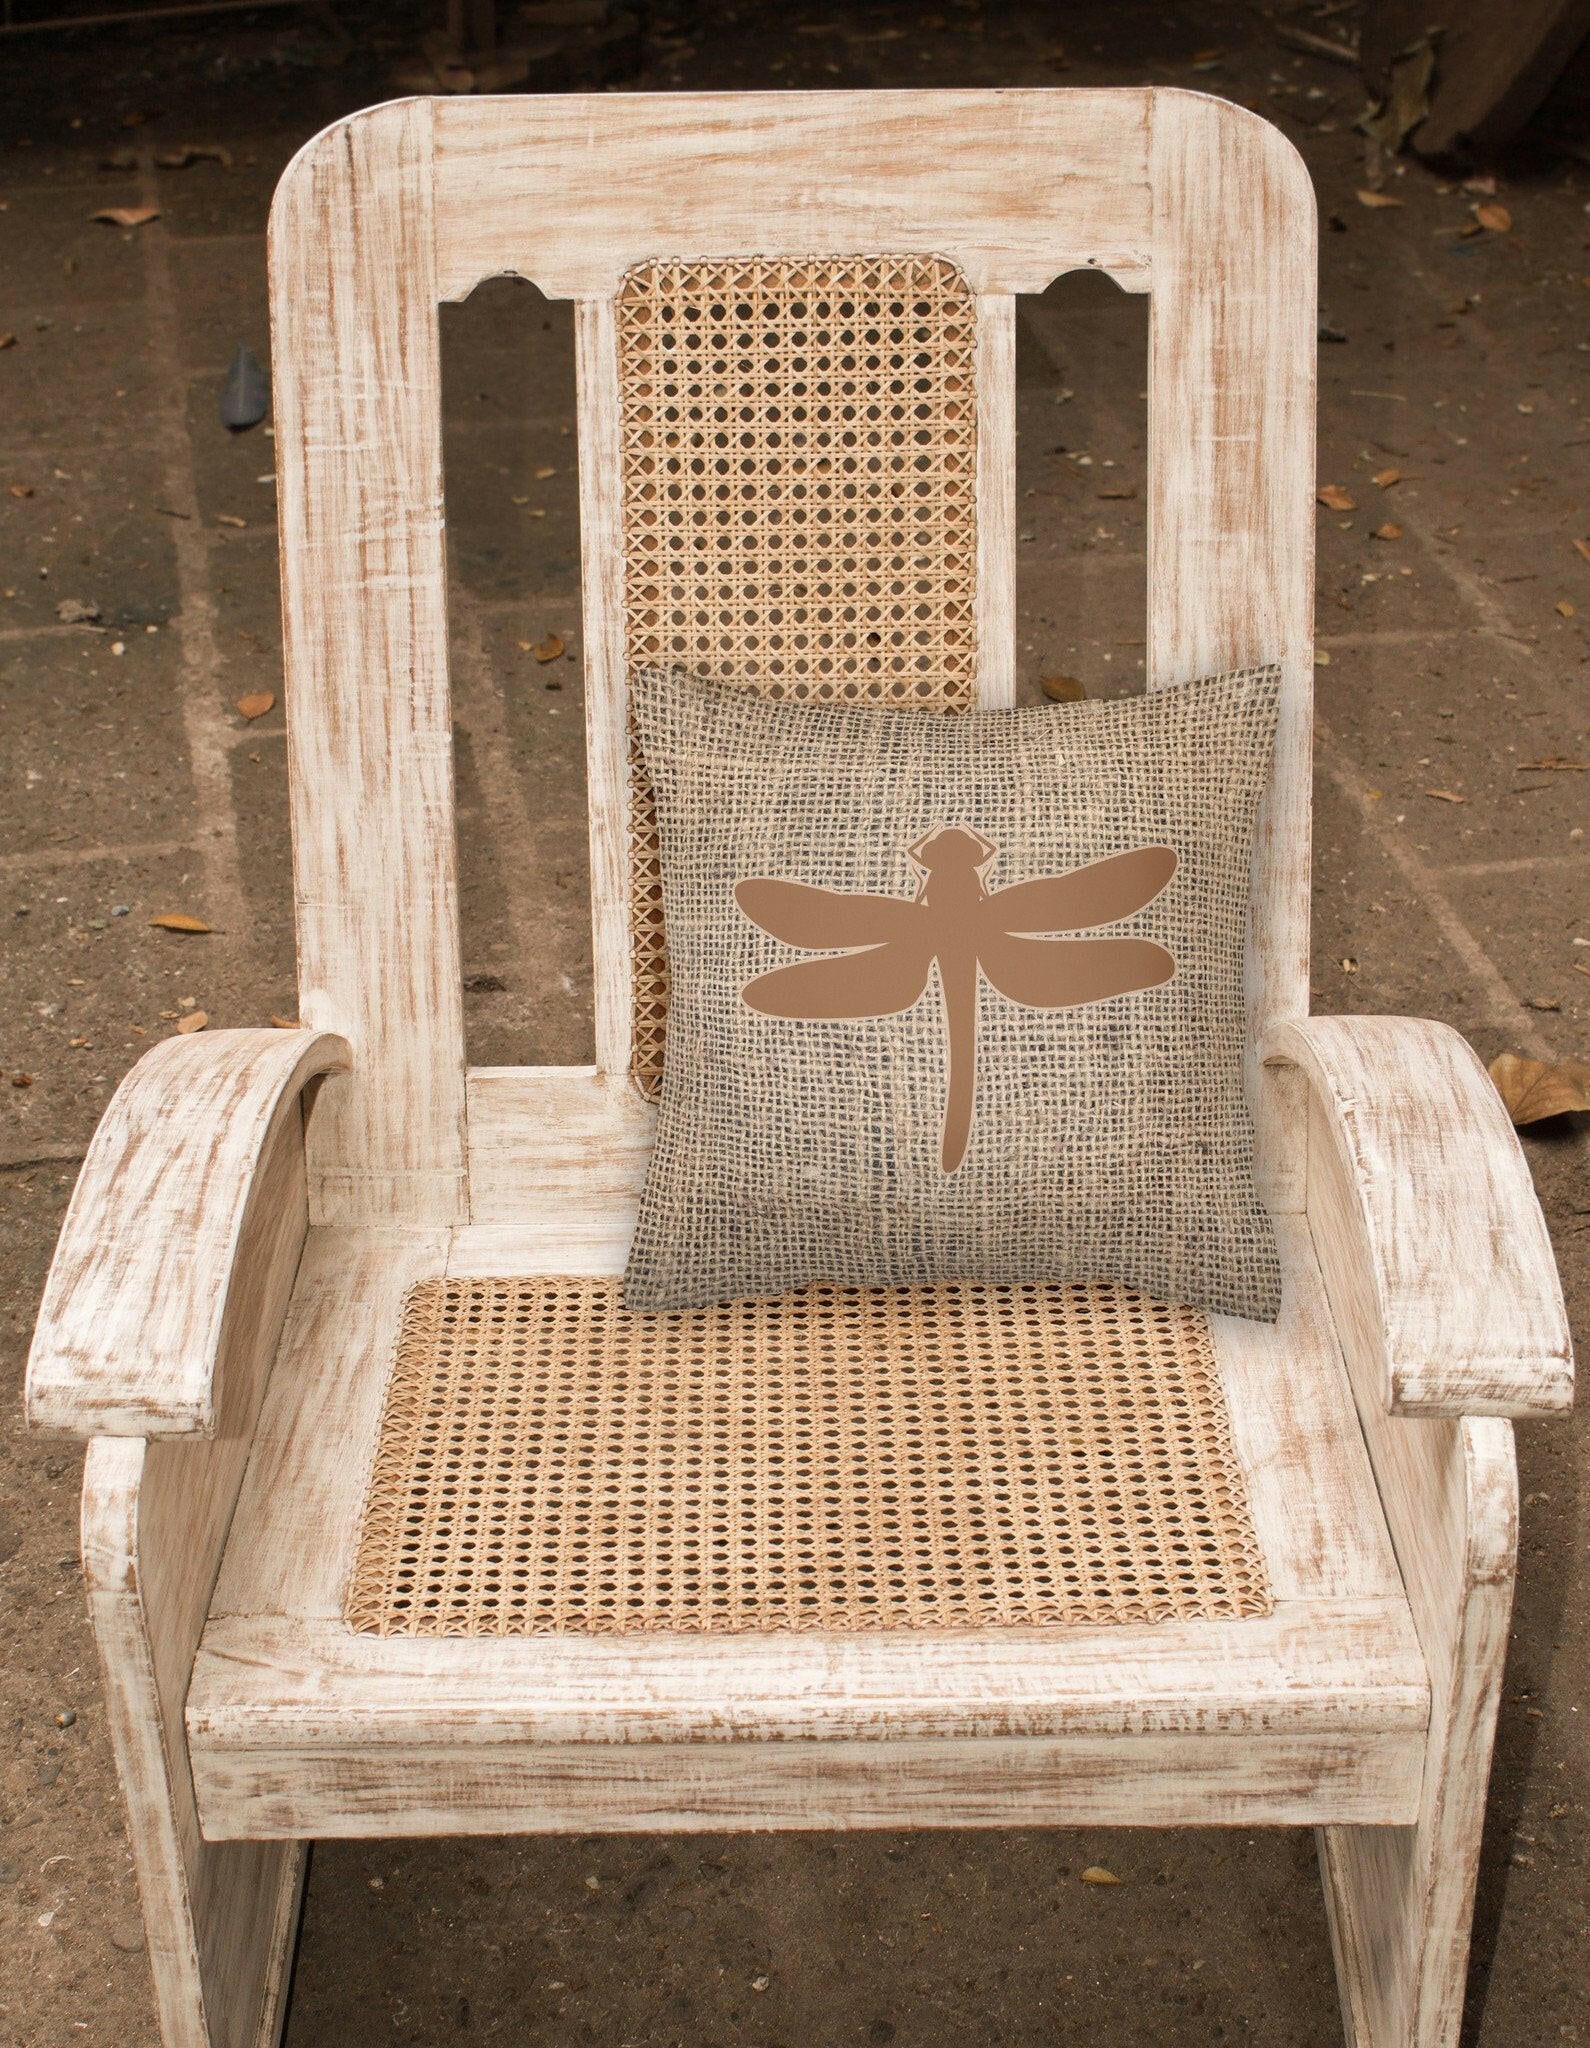 Dragonfly Burlap and Brown   Canvas Fabric Decorative Pillow BB1062 - the-store.com